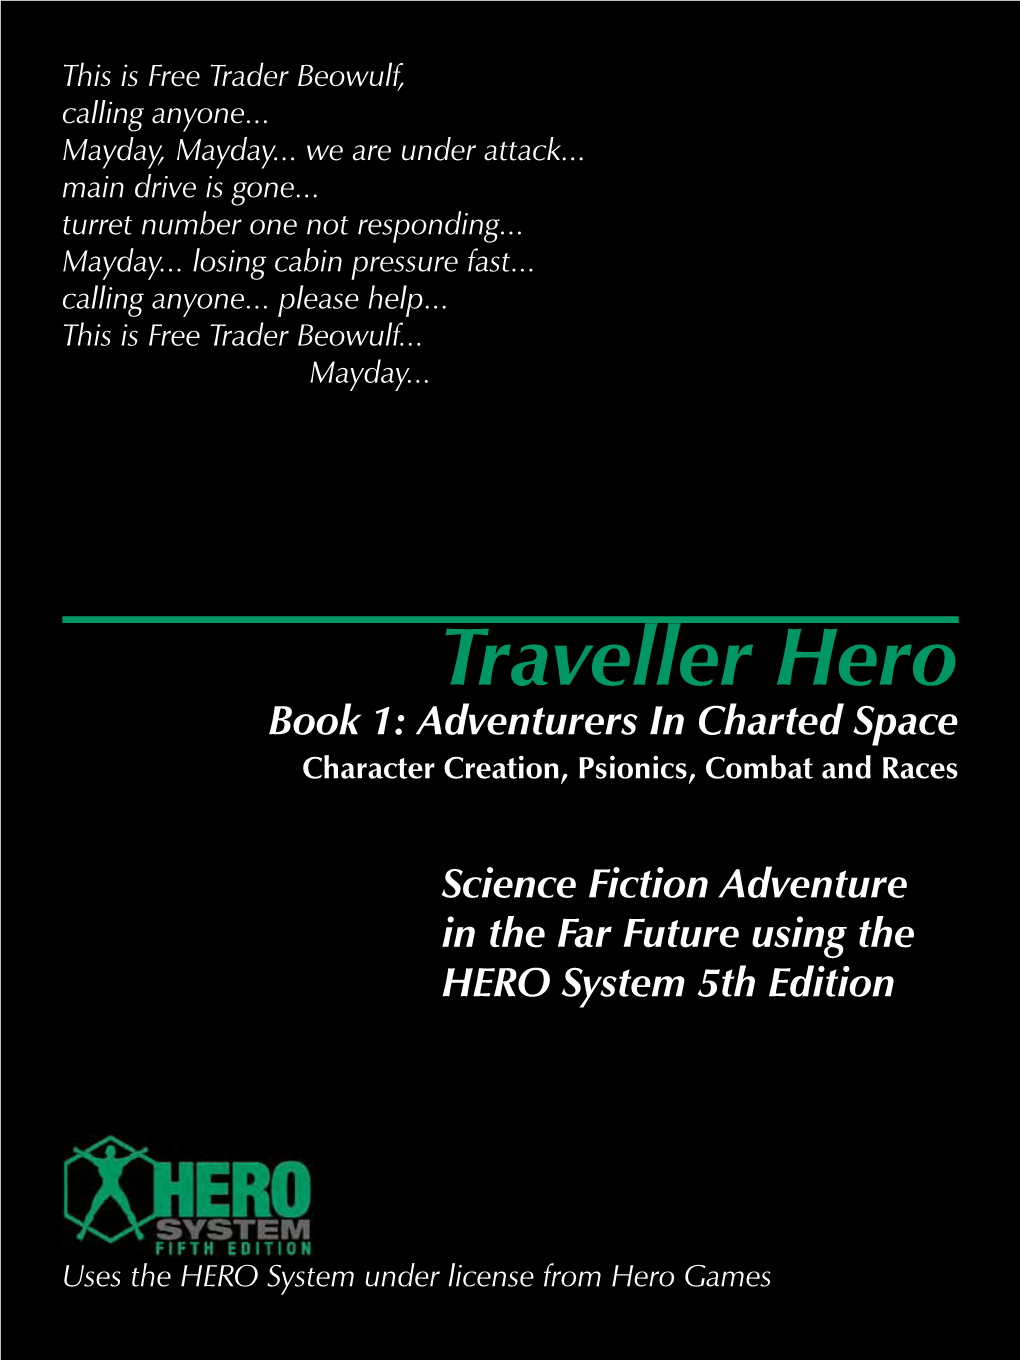 Traveller Hero Book 1: Adventurers in Charted Space Character Creation, Psionics, Combat and Races